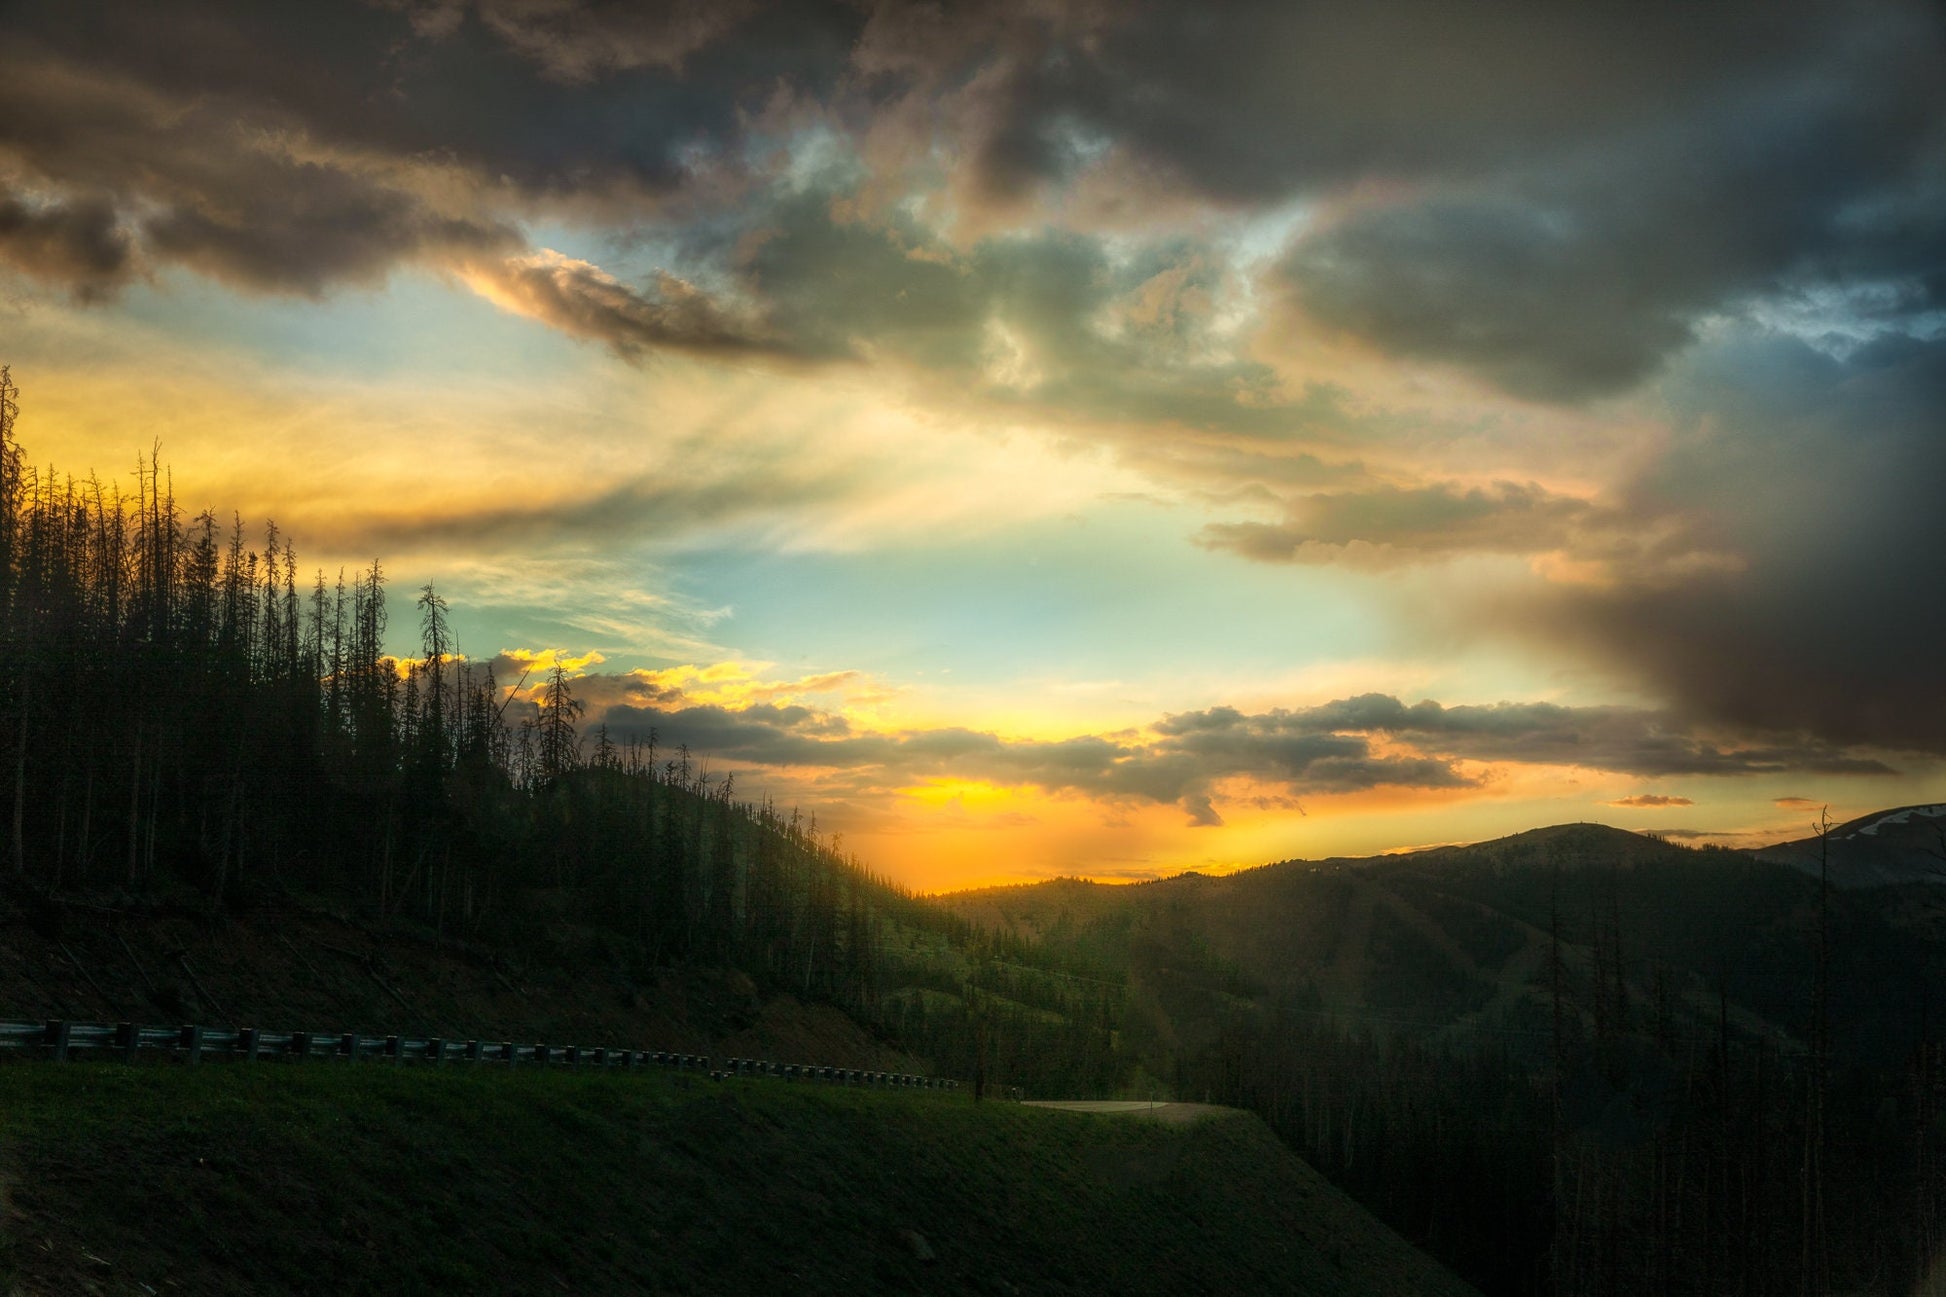 Canvas Wall Art Prints - Monarch Pass Sunset , Colorado Print - Wall Decoration Ideal for Home, Living Room, Bedroom , Kitchen and Office